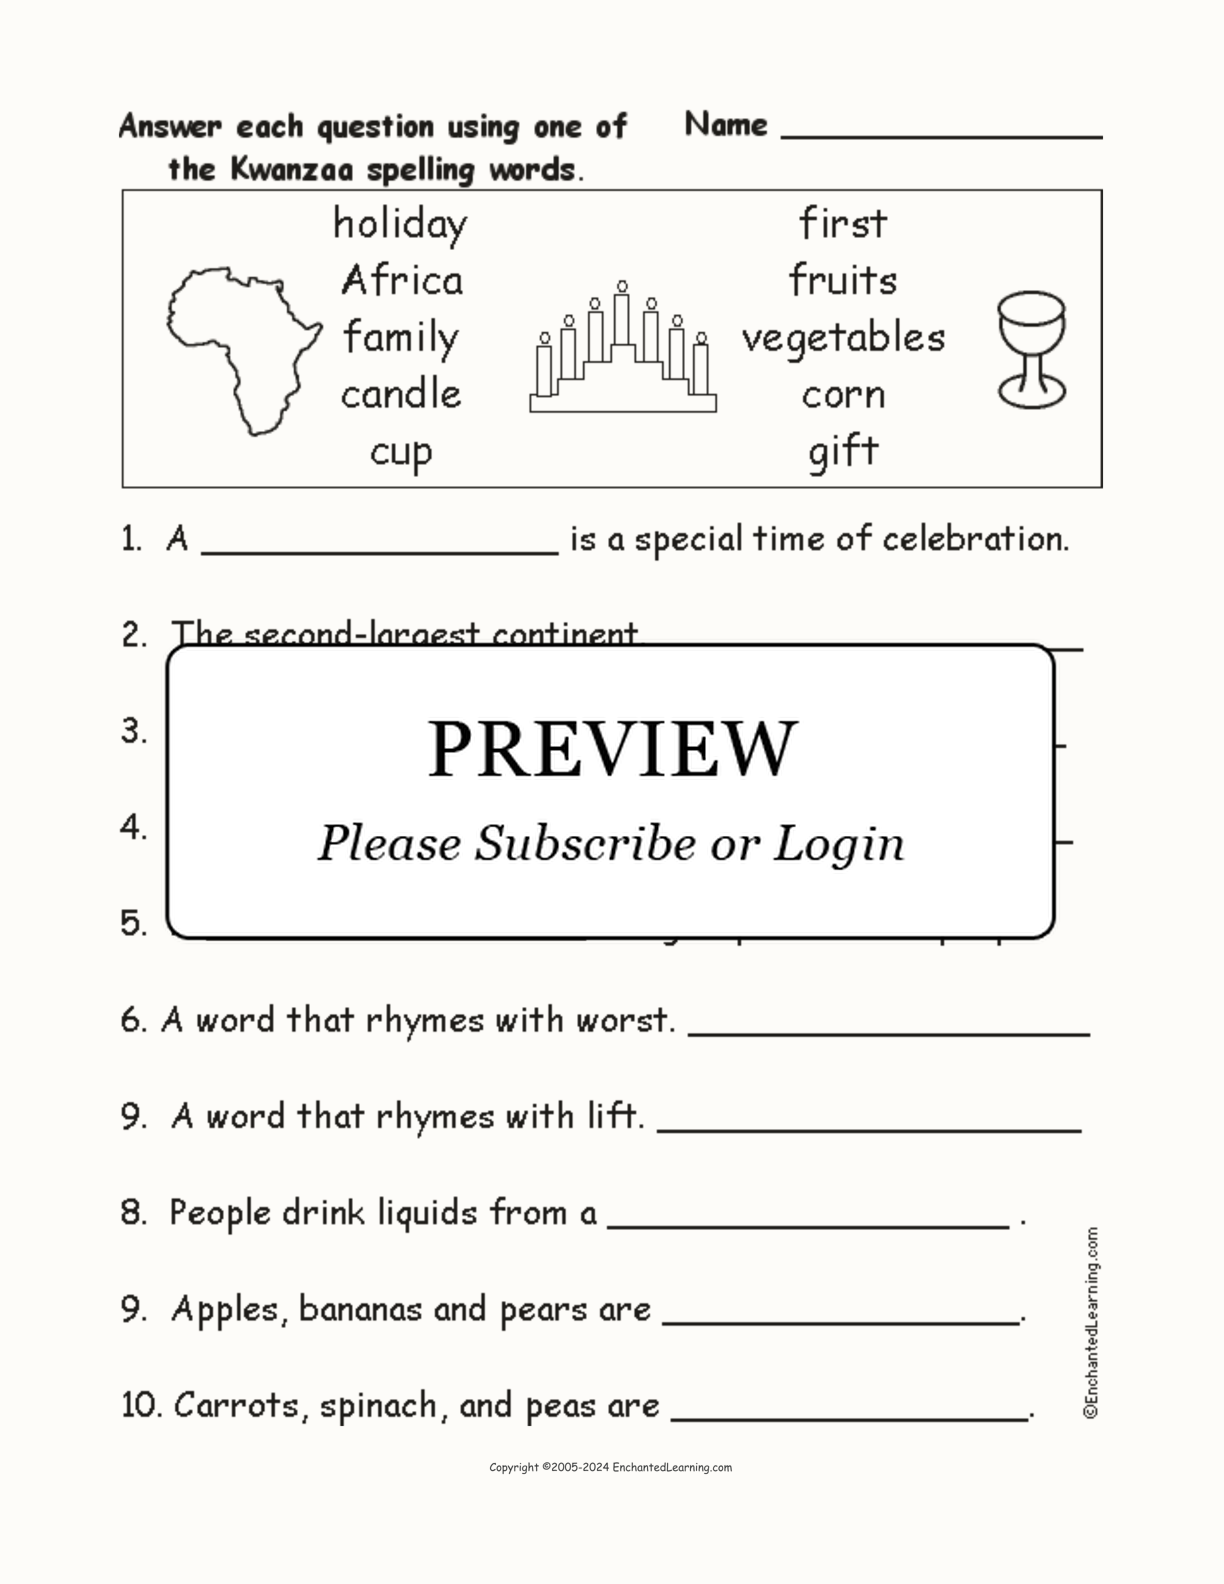 Kwanzaa Spelling Word Questions interactive worksheet page 1